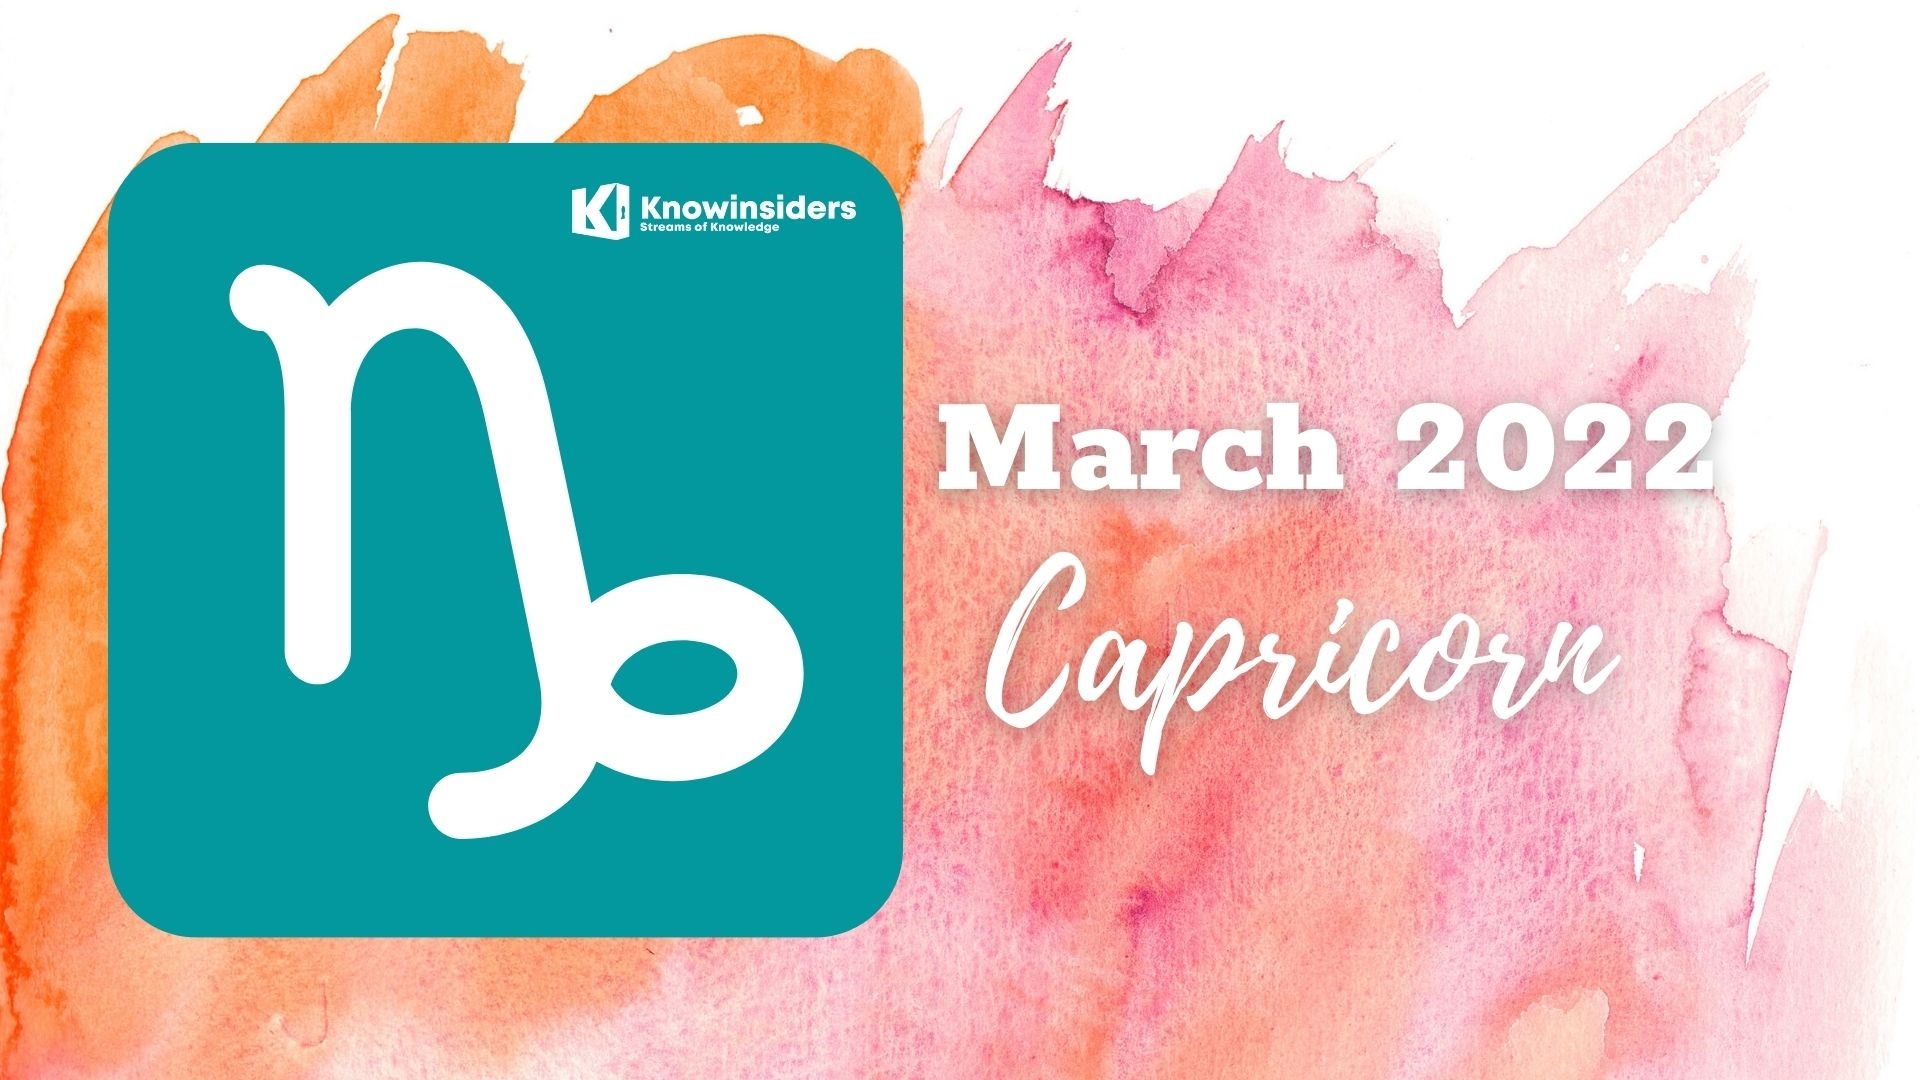 CAPRICORN March 2022 Horoscope: Astrological Prediction for Love, Career, Money and Health